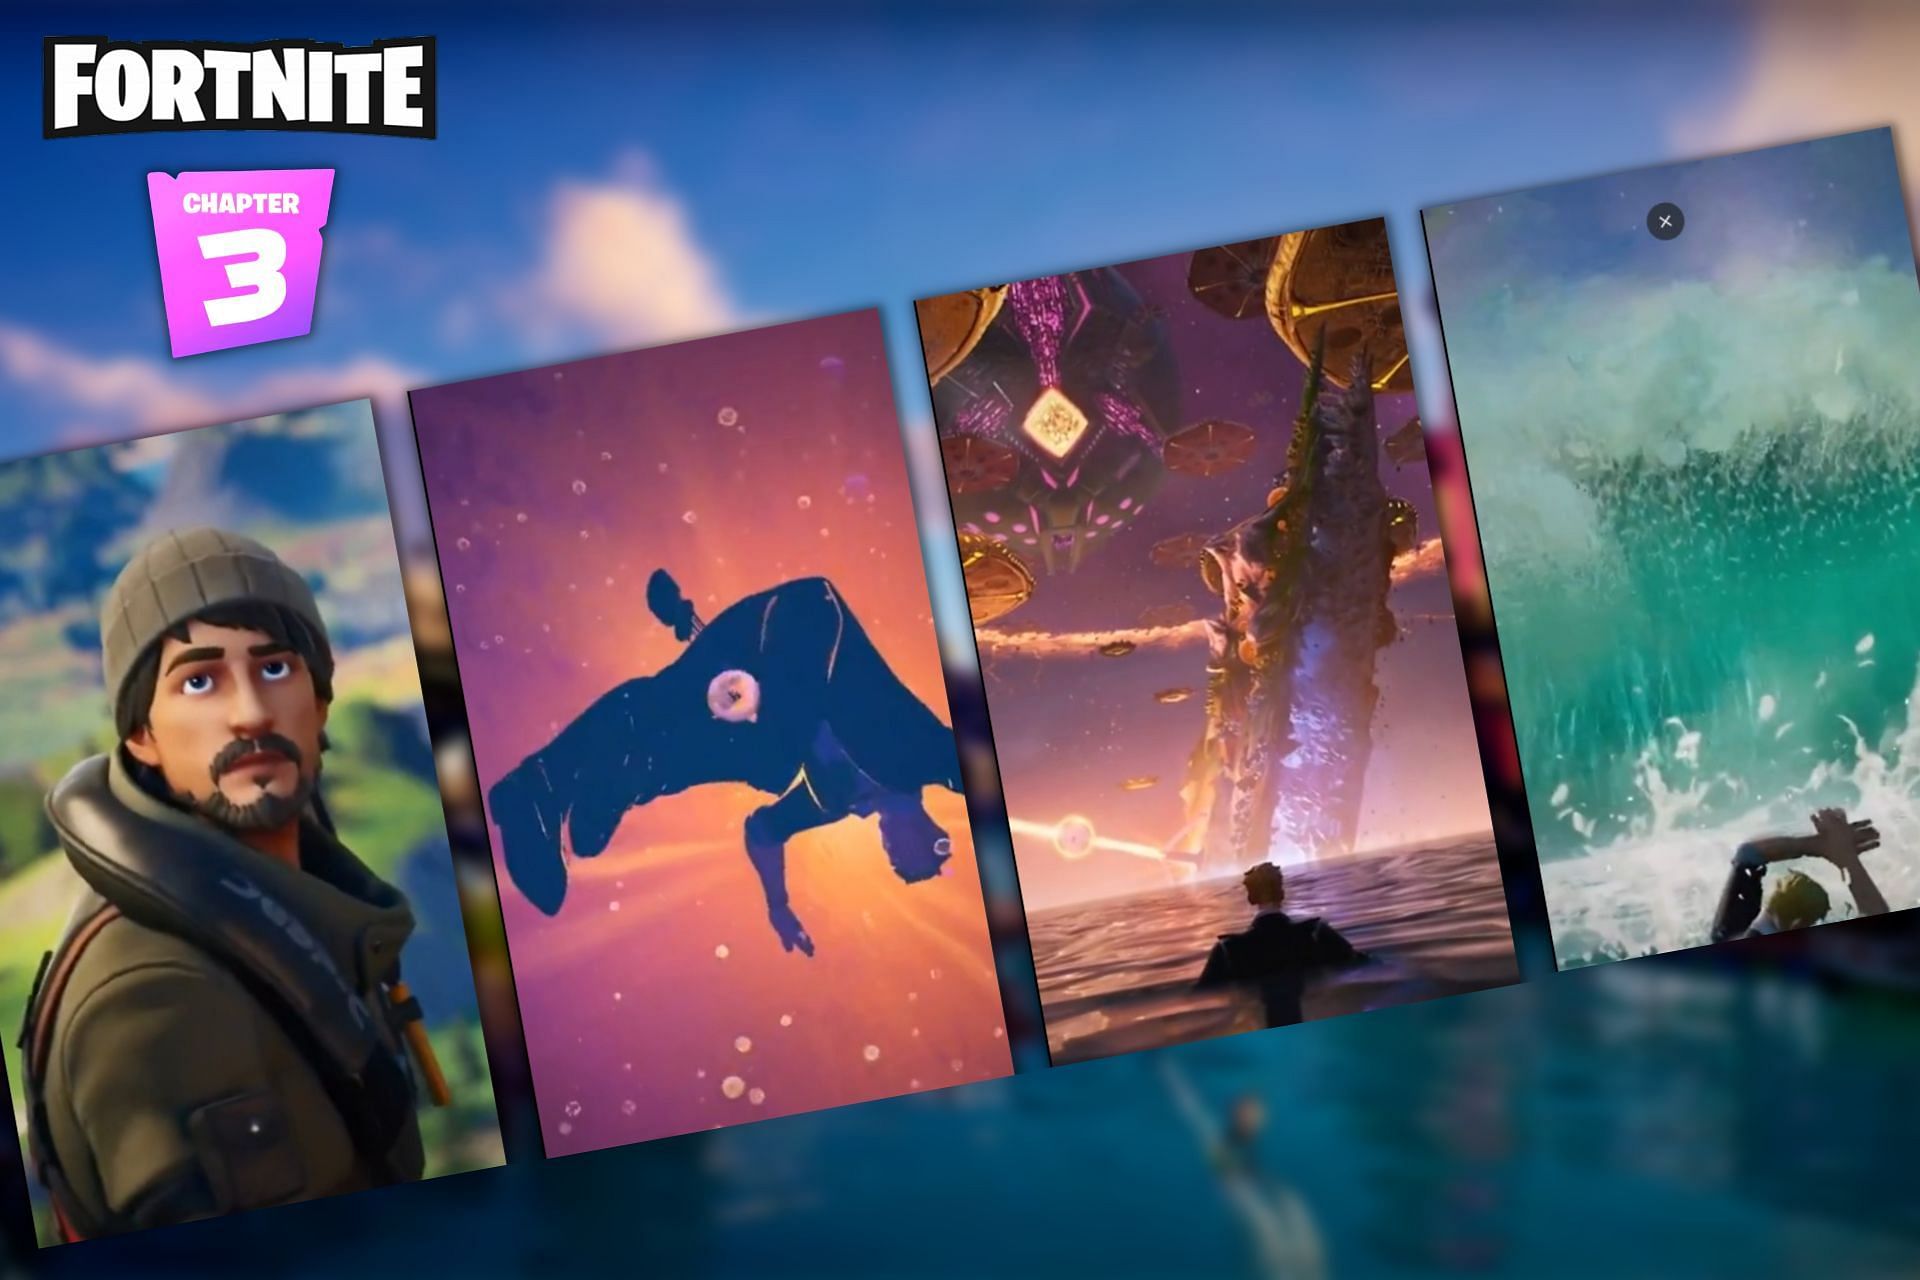 Epic Games seems to have leaked the official Fortnite Chapter 3 trailer (Image via Sportskeeda)